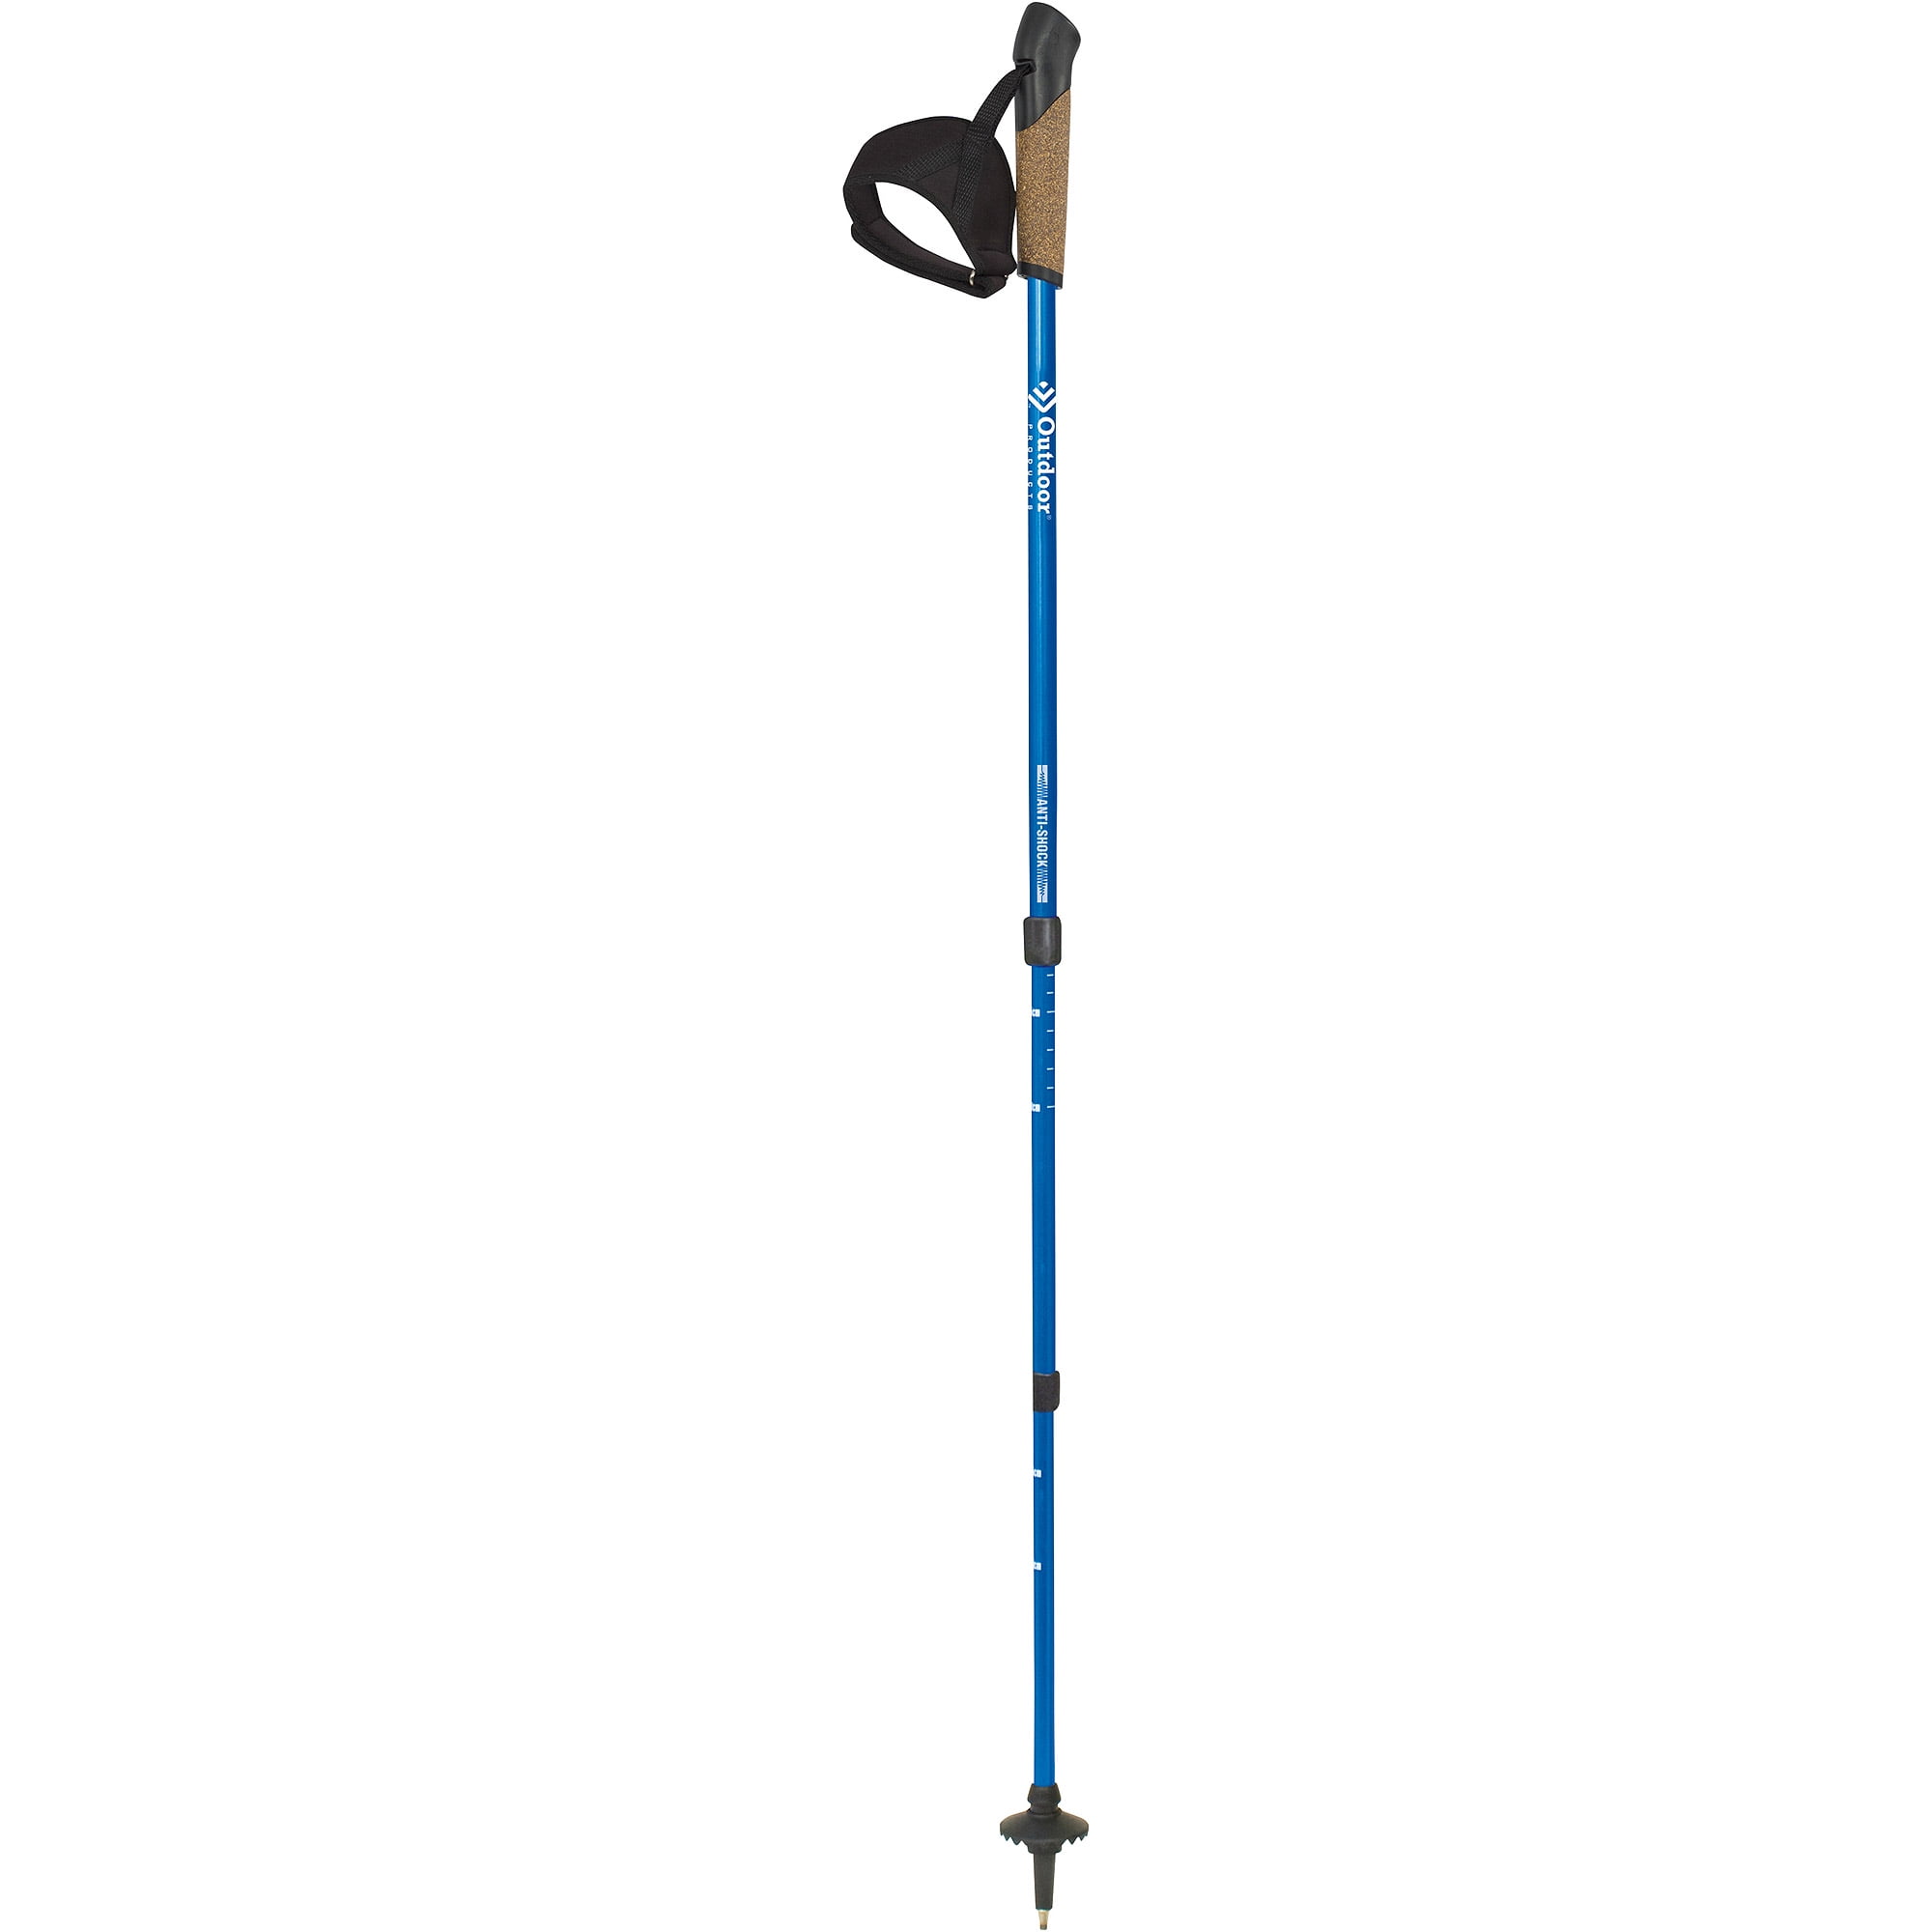 outdoor products trekking pole